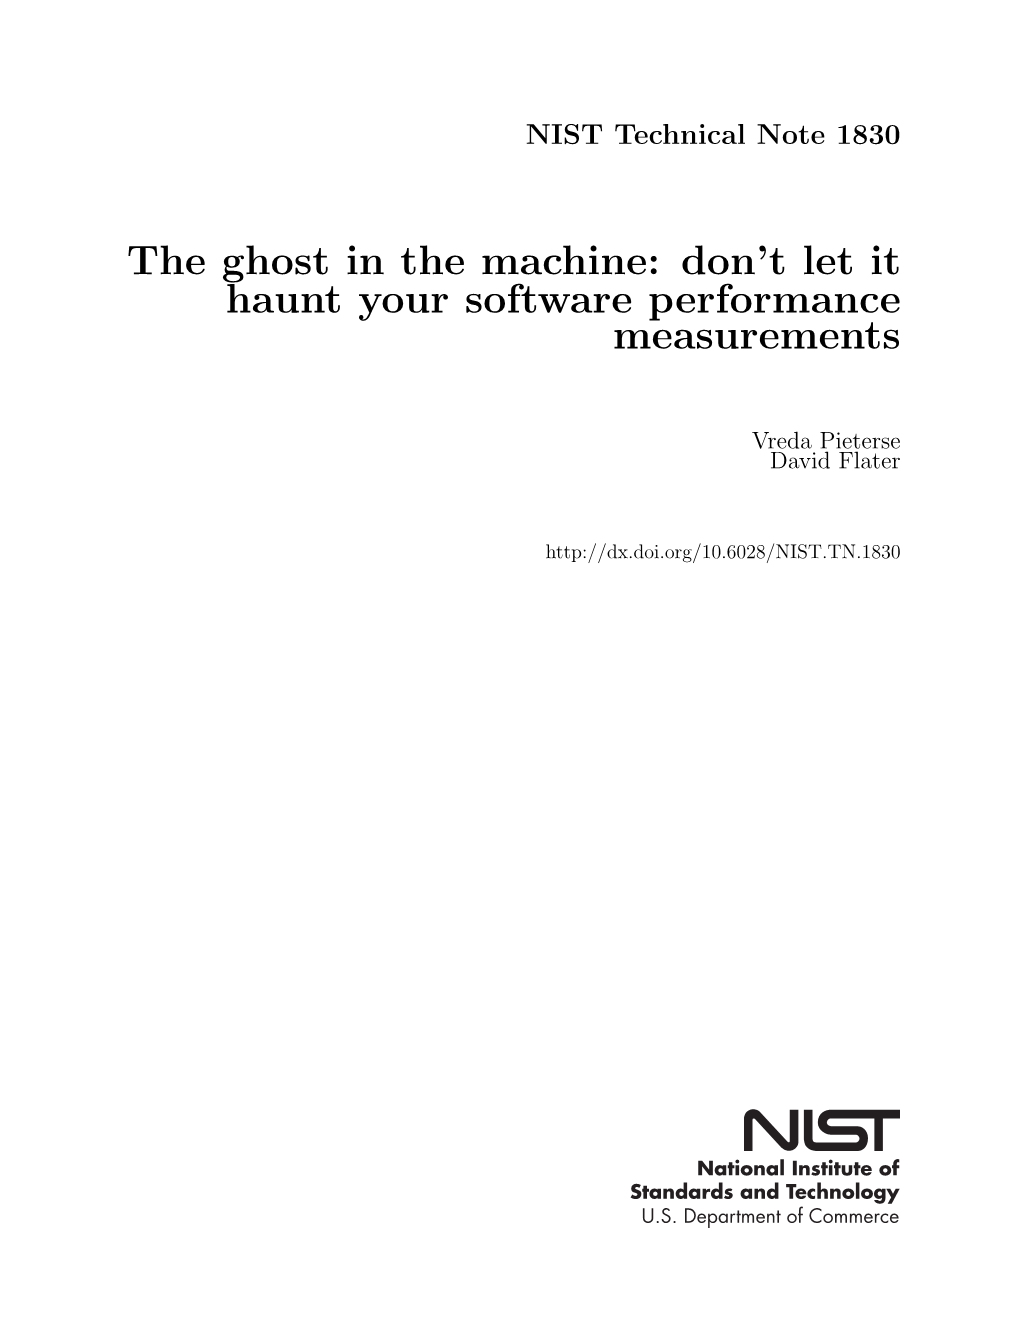 The Ghost in the Machine: Don't Let It